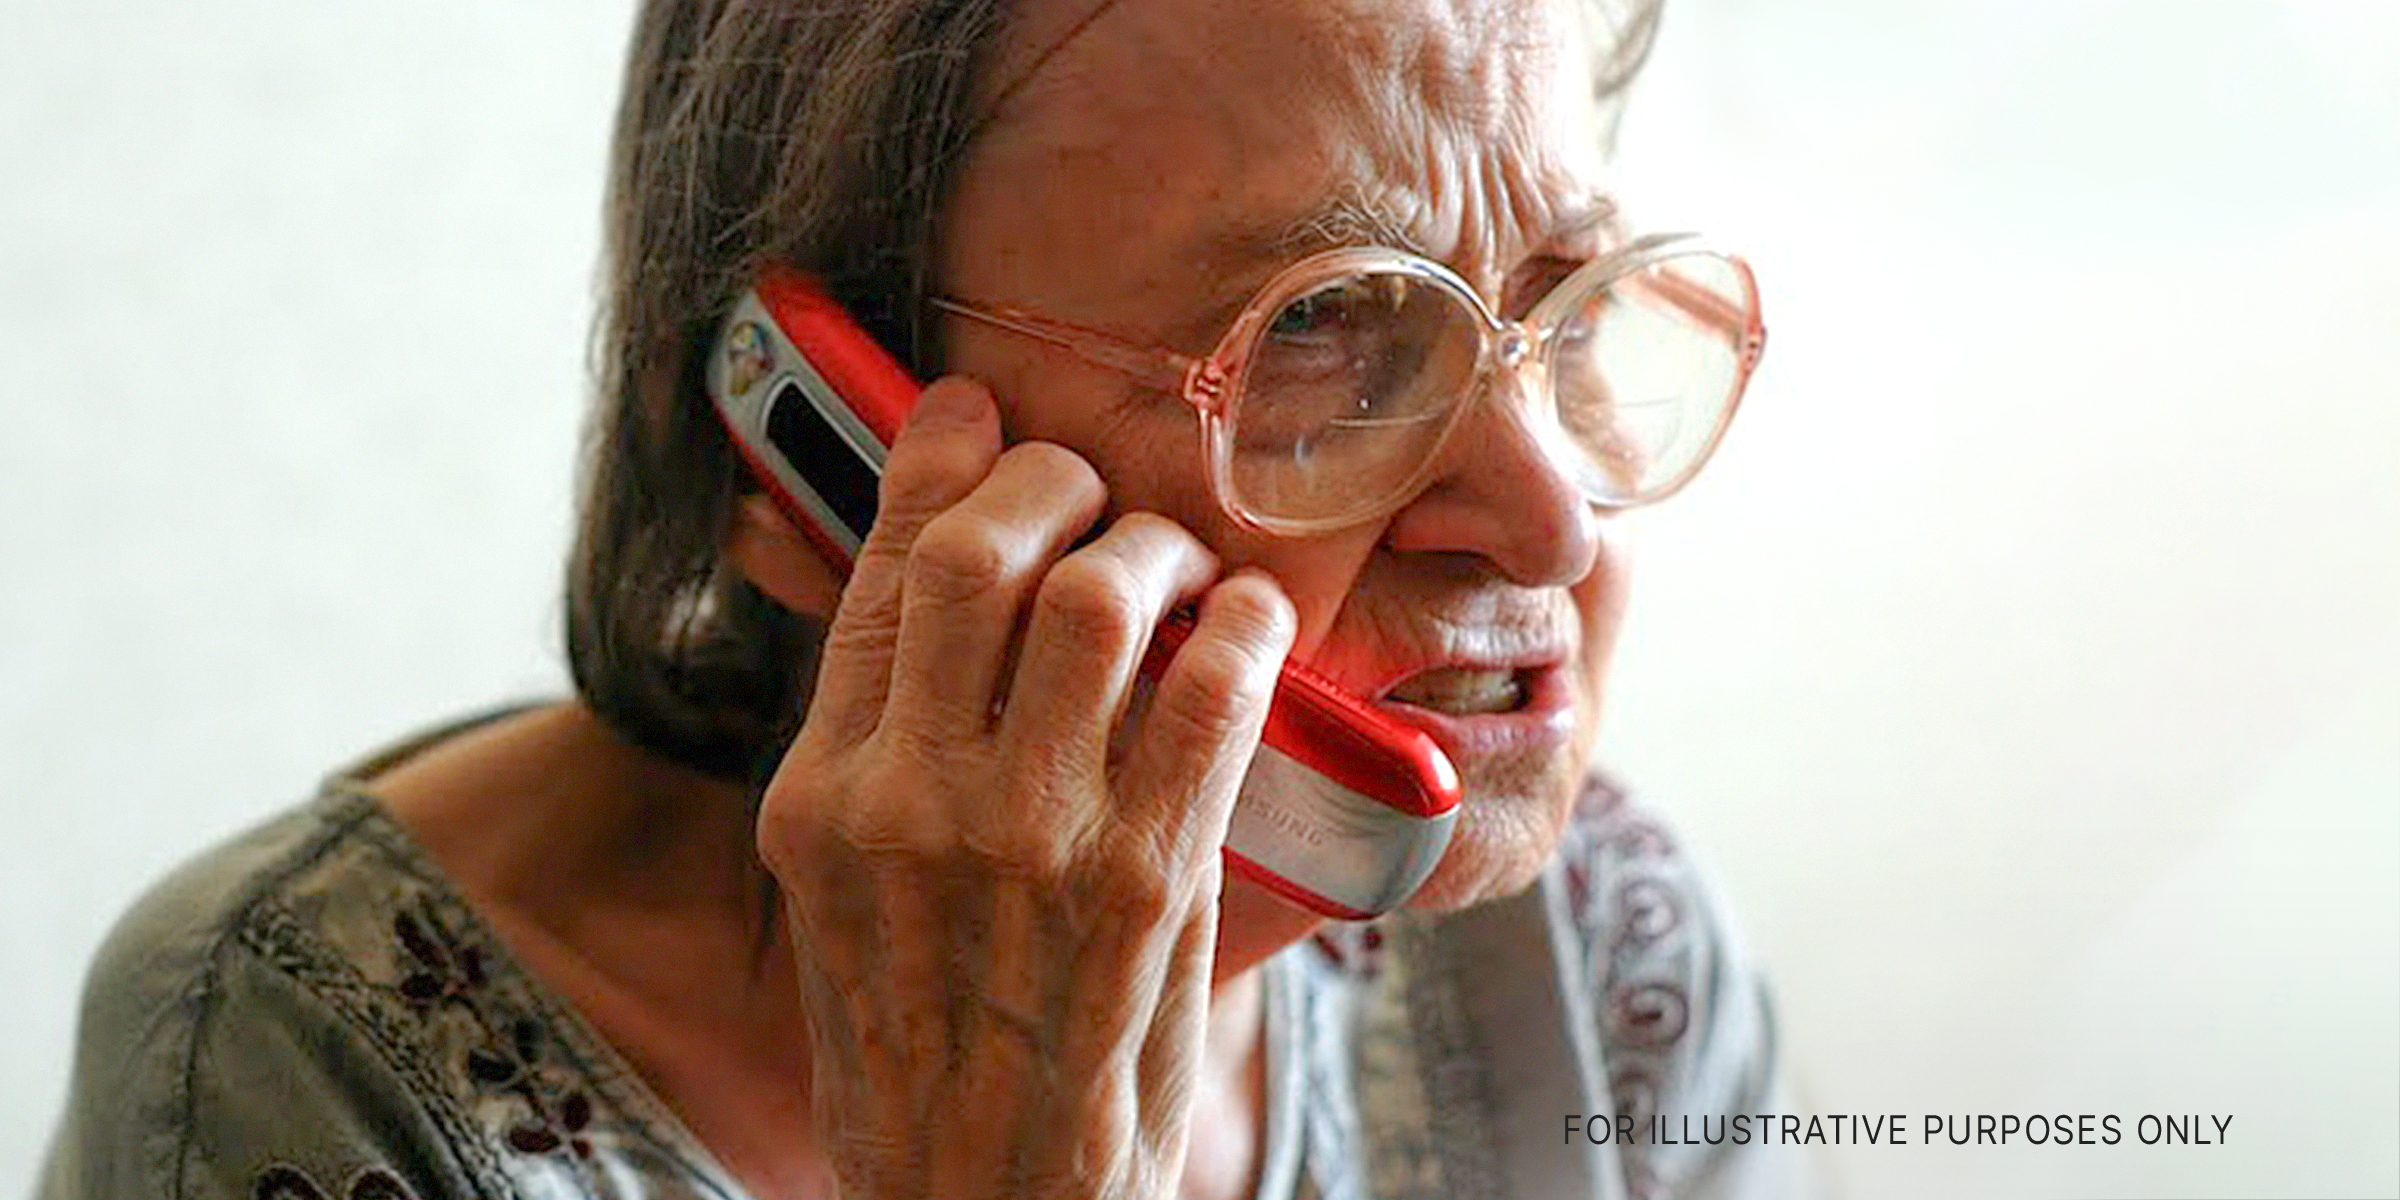 An Old Woman Speaking on a Phone | Source: Flickr.com/borosjuli/CC BY 2.0